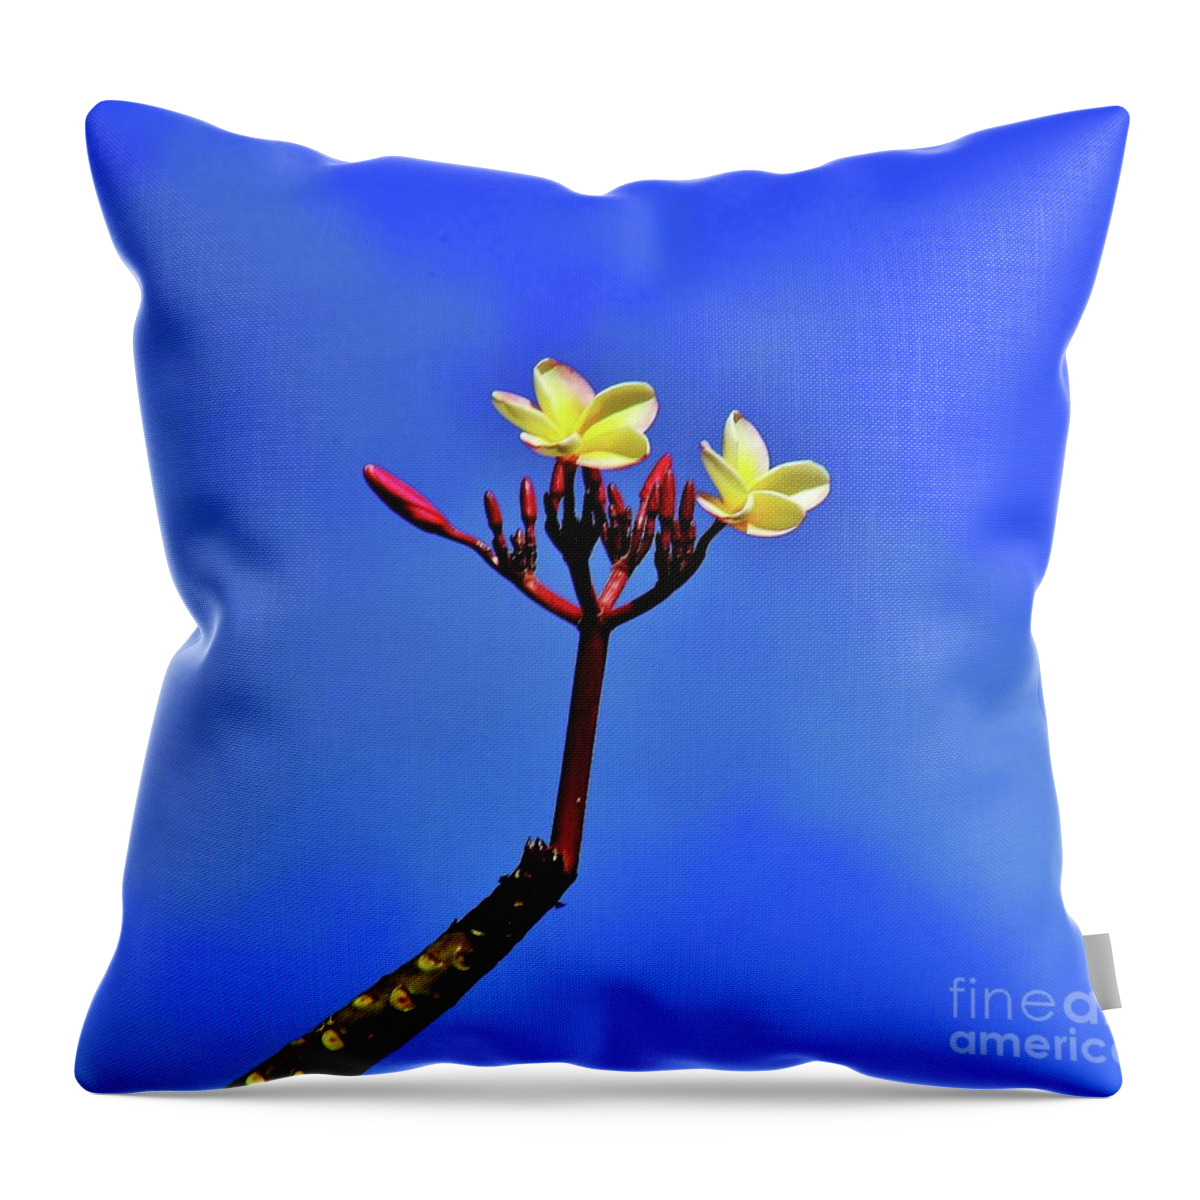 Plumaria Throw Pillow featuring the photograph Fresh Growth Two by Craig Wood